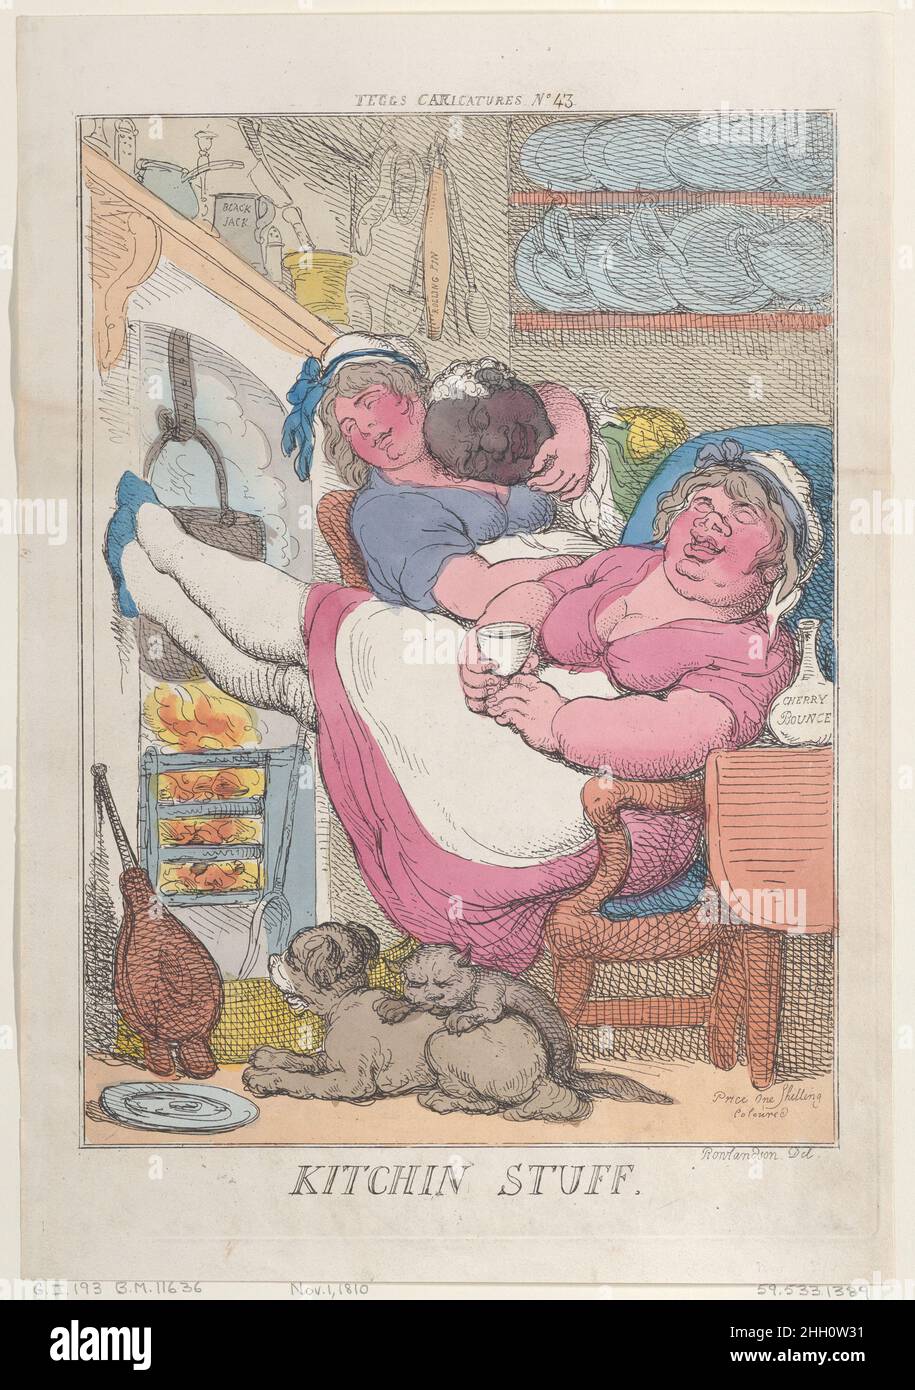 Kitchin Stuff November 1, 1810 Thomas Rowlandson A cook sleeps by the kitchen fire in an armchair with her feetup on the chimney-piece. She holds a glass filled from a bottle of 'Cherry Bounce' at her elbow. A plump kitchen-maid is also asleep beside her, with her arm round the neck of a footman who sleeps on her shoulder.. Kitchin Stuff. Thomas Rowlandson (British, London 1757–1827 London). November 1, 1810. Hand-colored etching. Thomas Tegg (British, 1776–1846). Prints Stock Photo